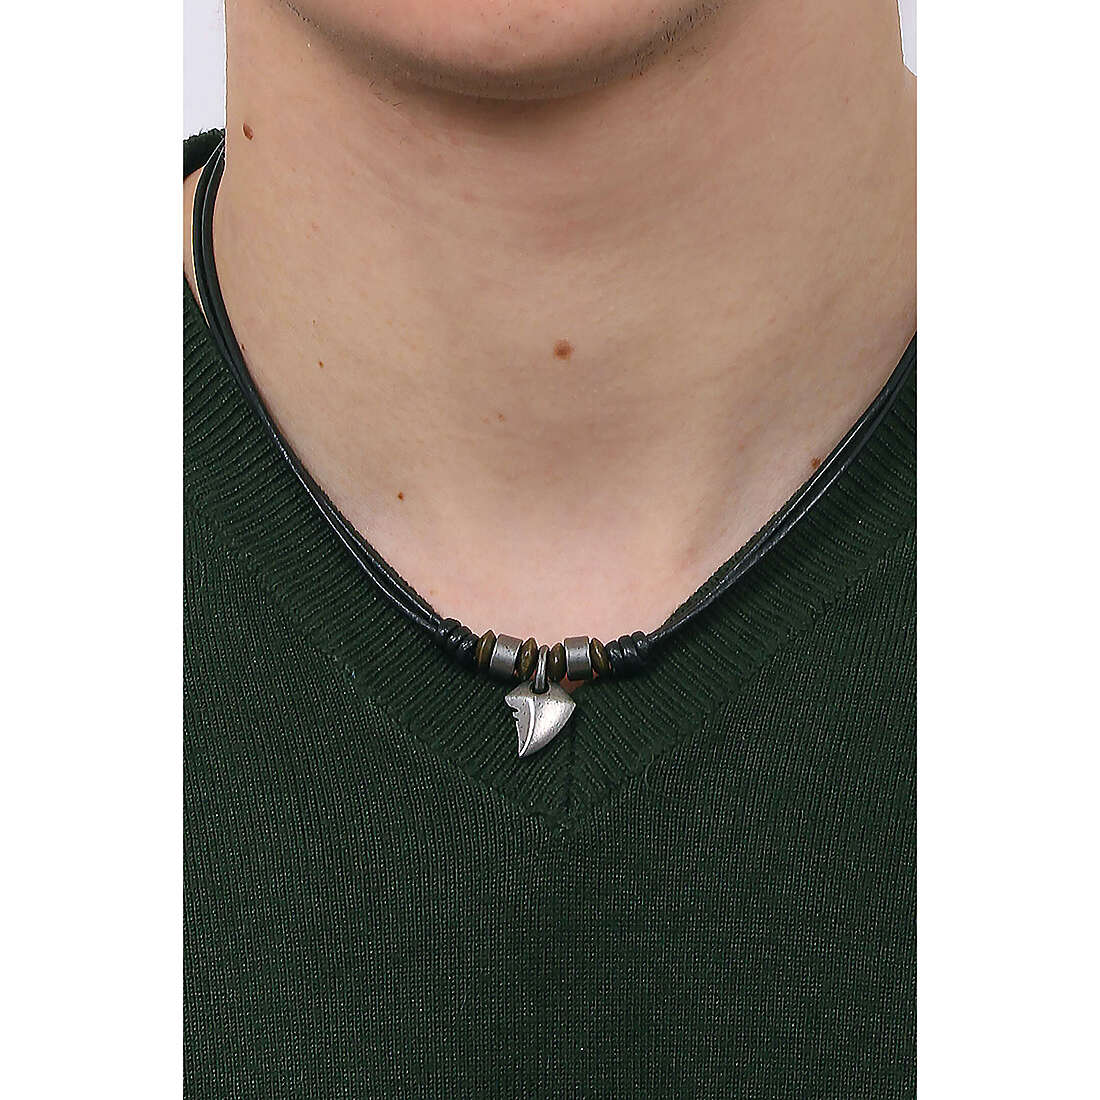 Fossil necklaces man JF85832040 wearing